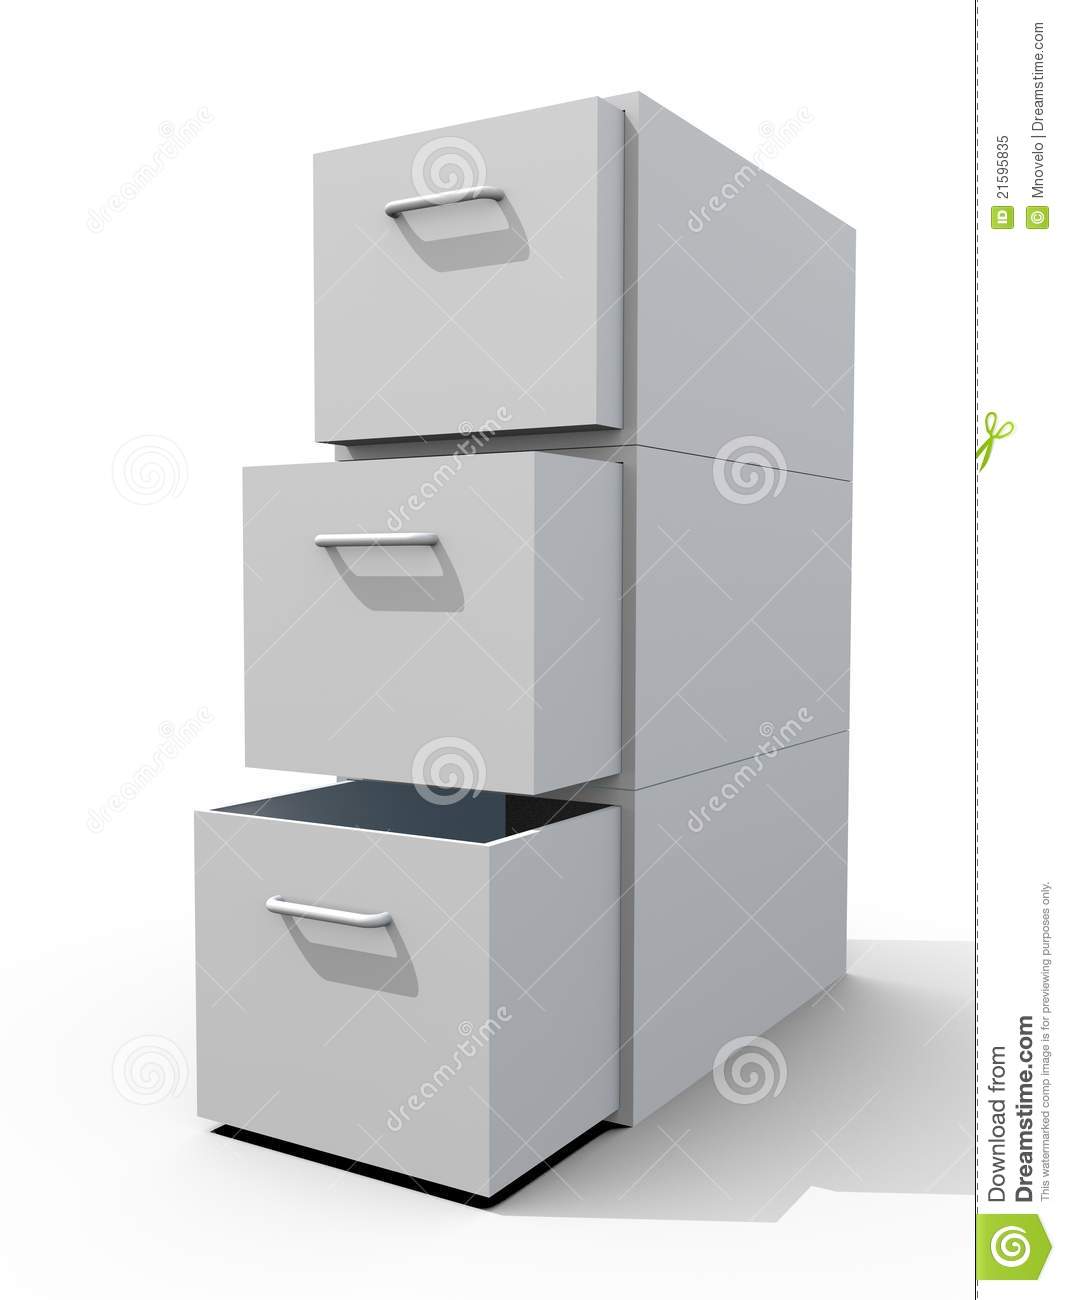 File Cabinet Royalty Free Stock Photo   Image  21595835